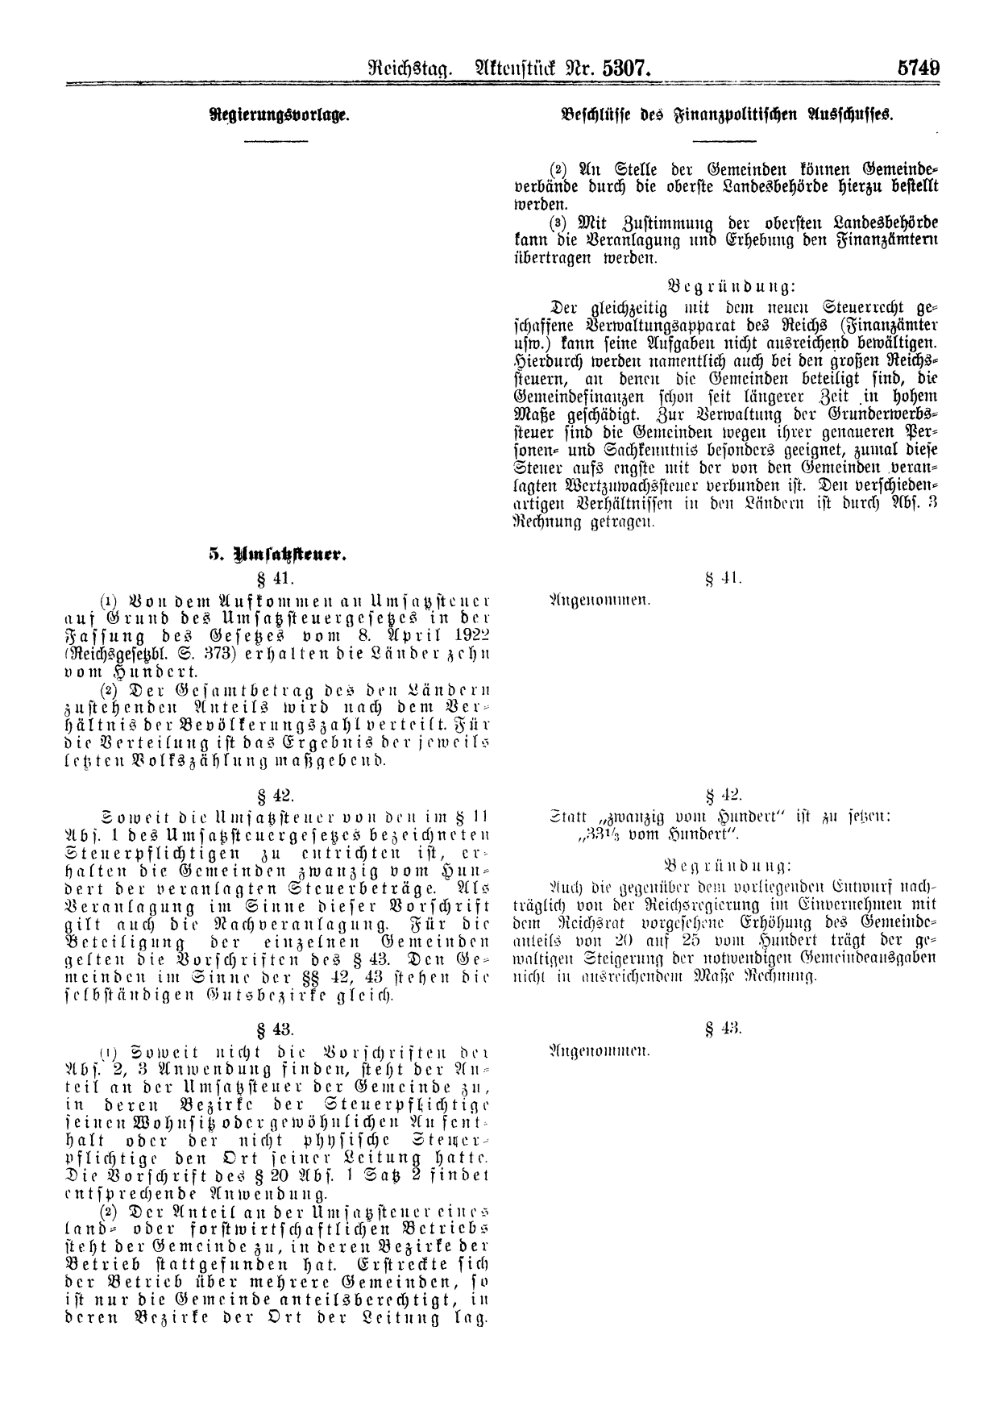 Scan of page 5749